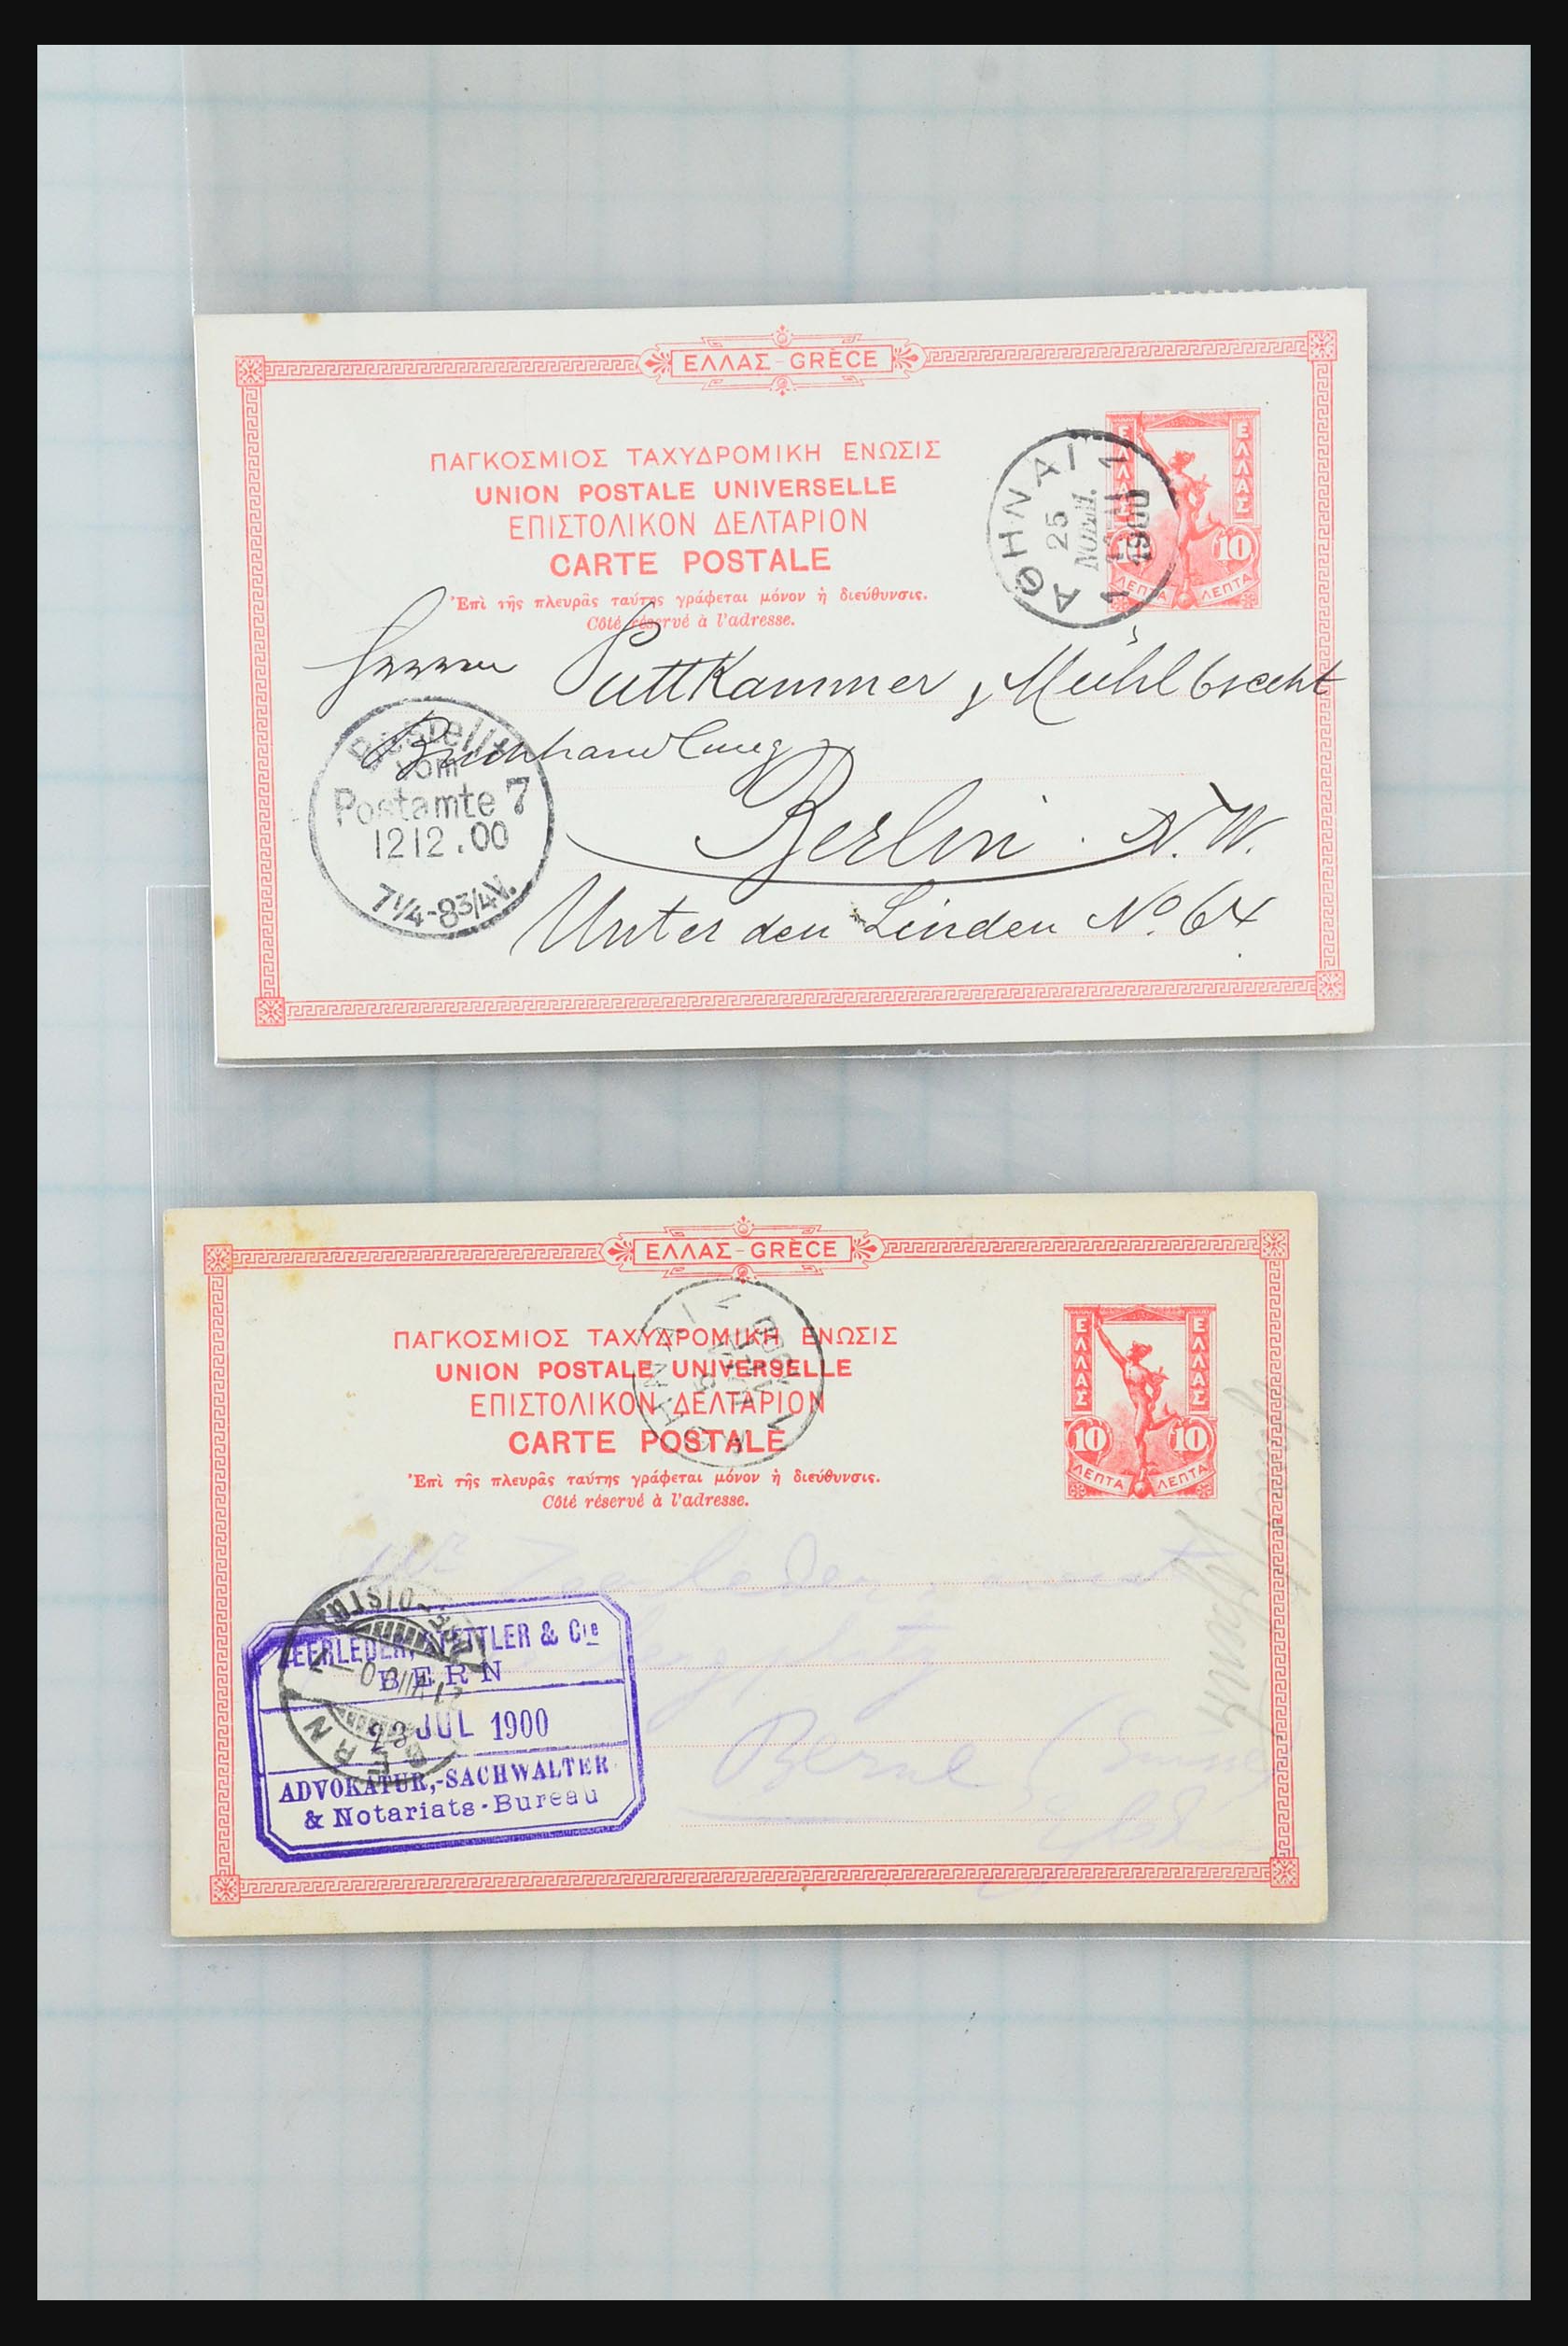 31358 024 - 31358 Portugal/Luxemburg/Greece covers 1880-1960.